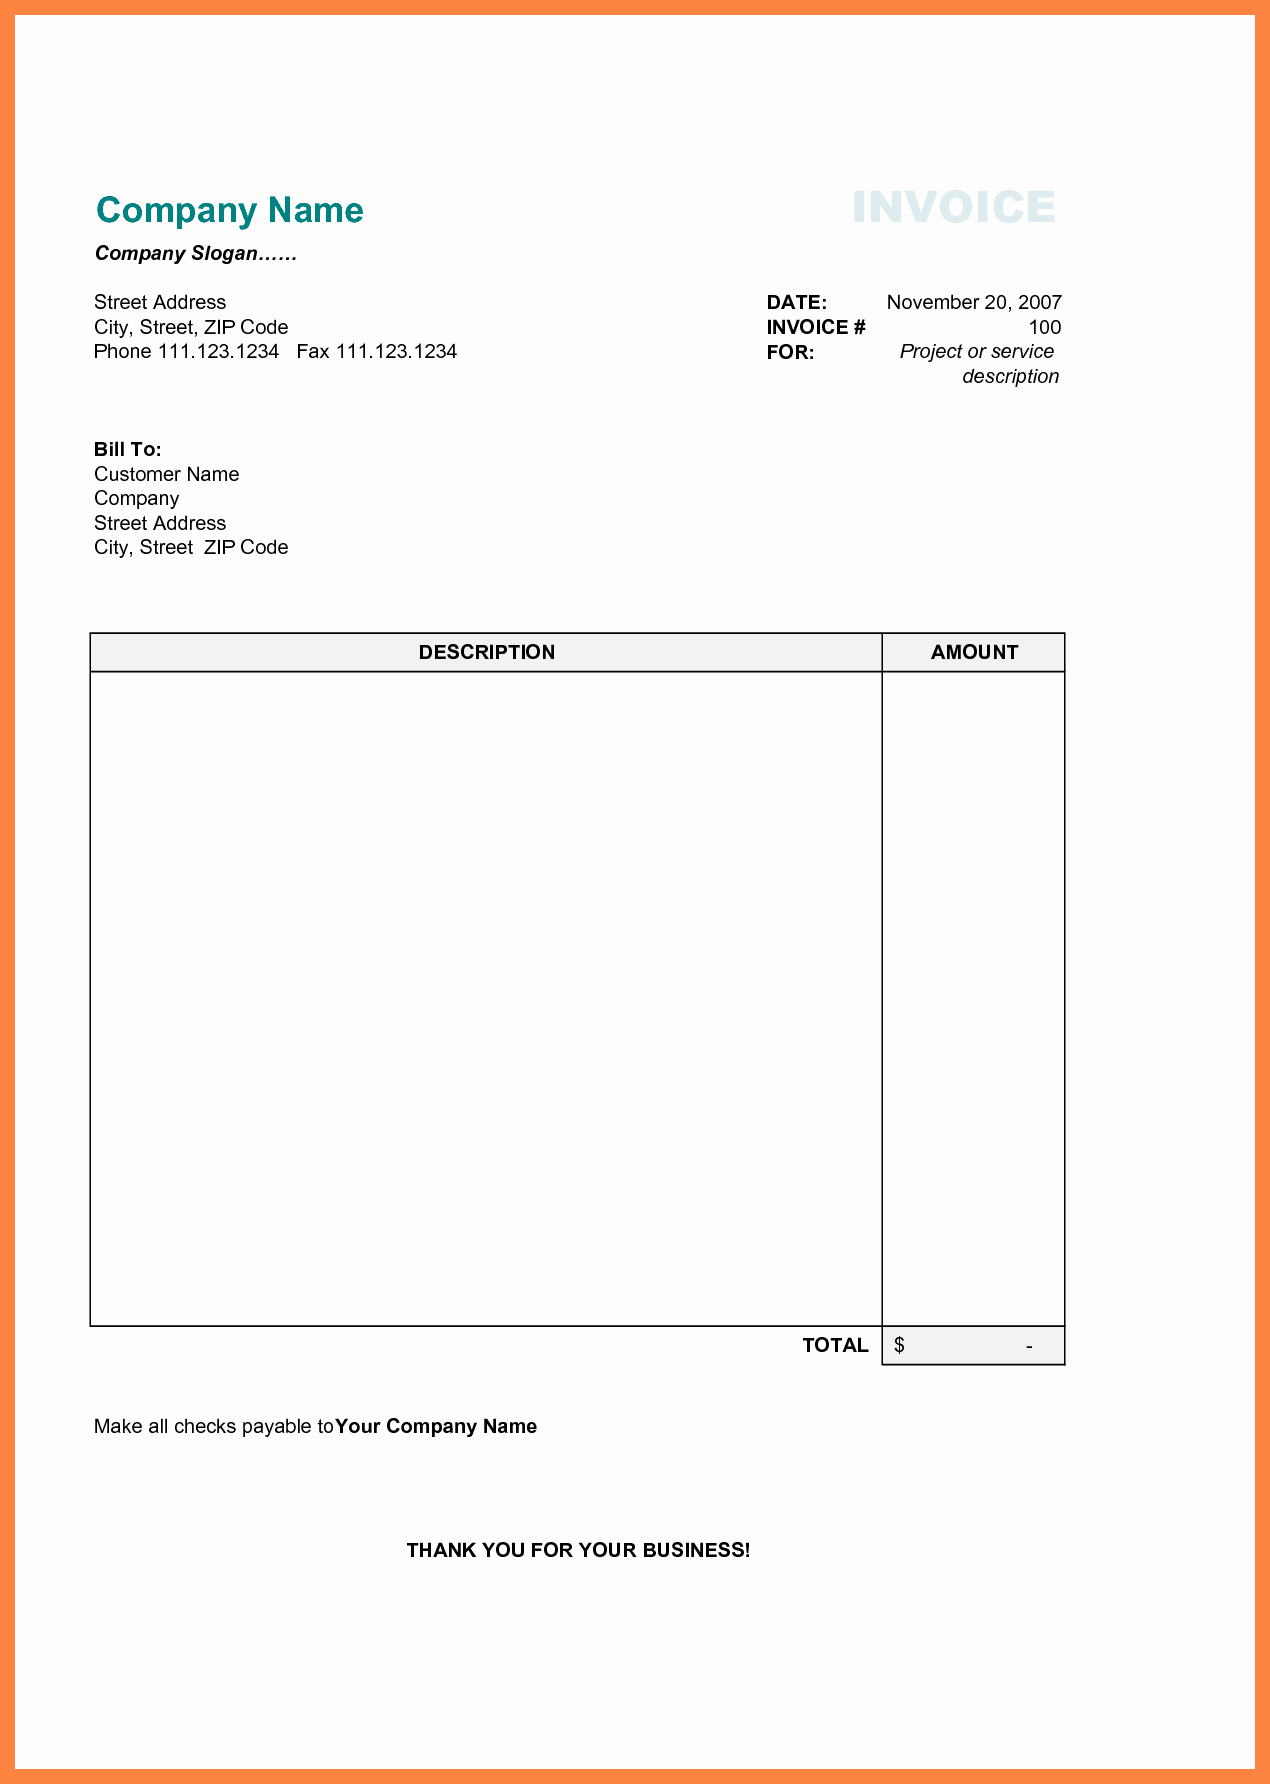 Invoice Bill format In Excel Best Of Free Printable Business Invoice Template Invoice format